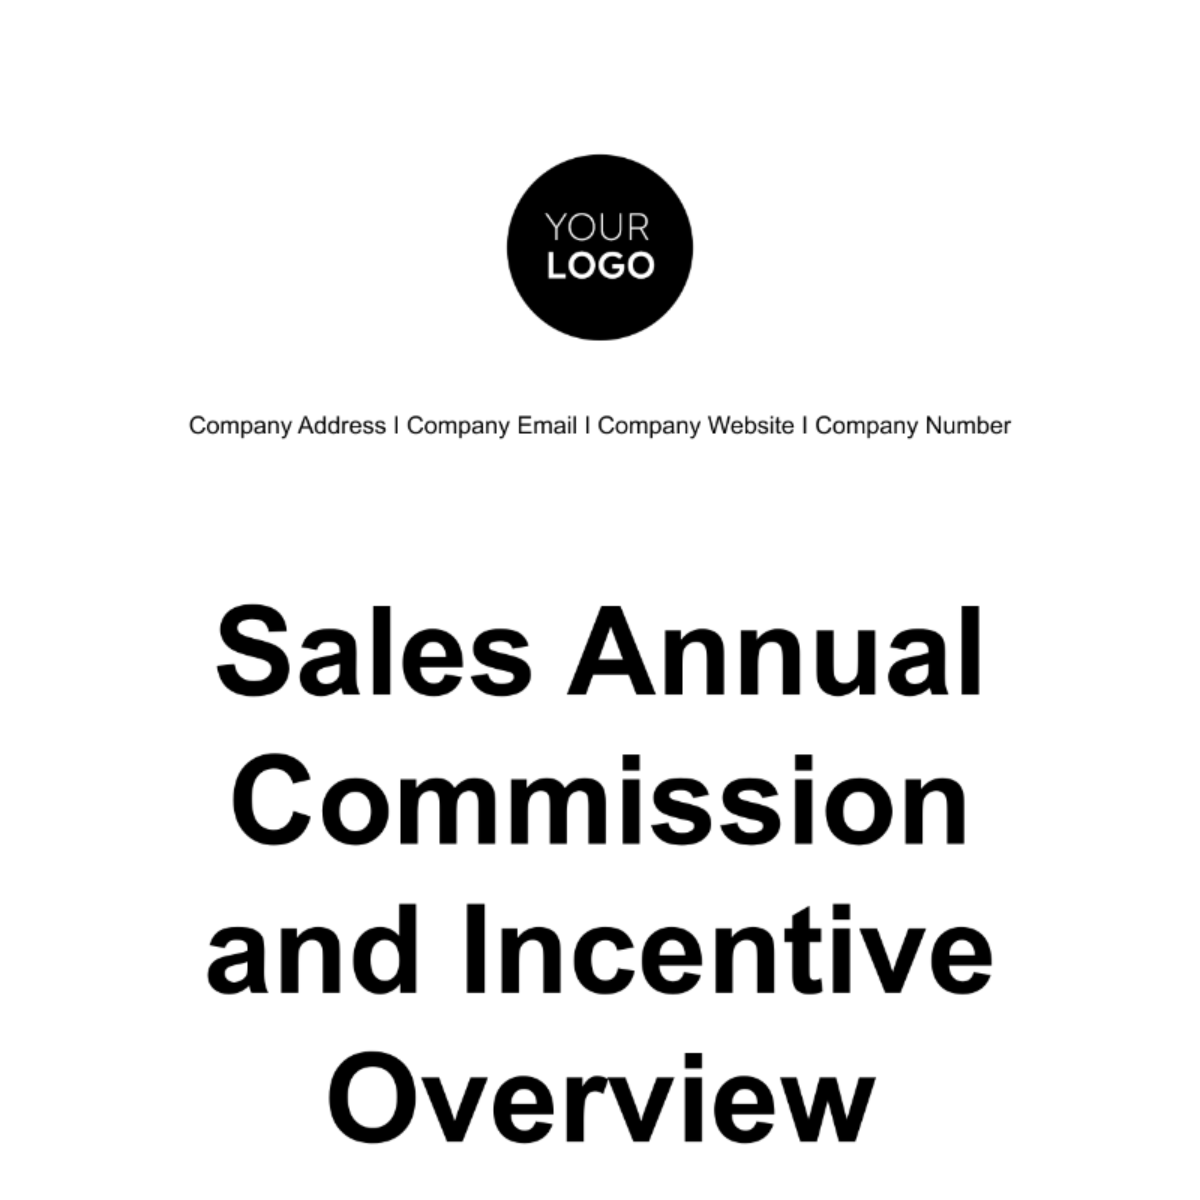 Sales Annual Commission and Incentive Overview Template